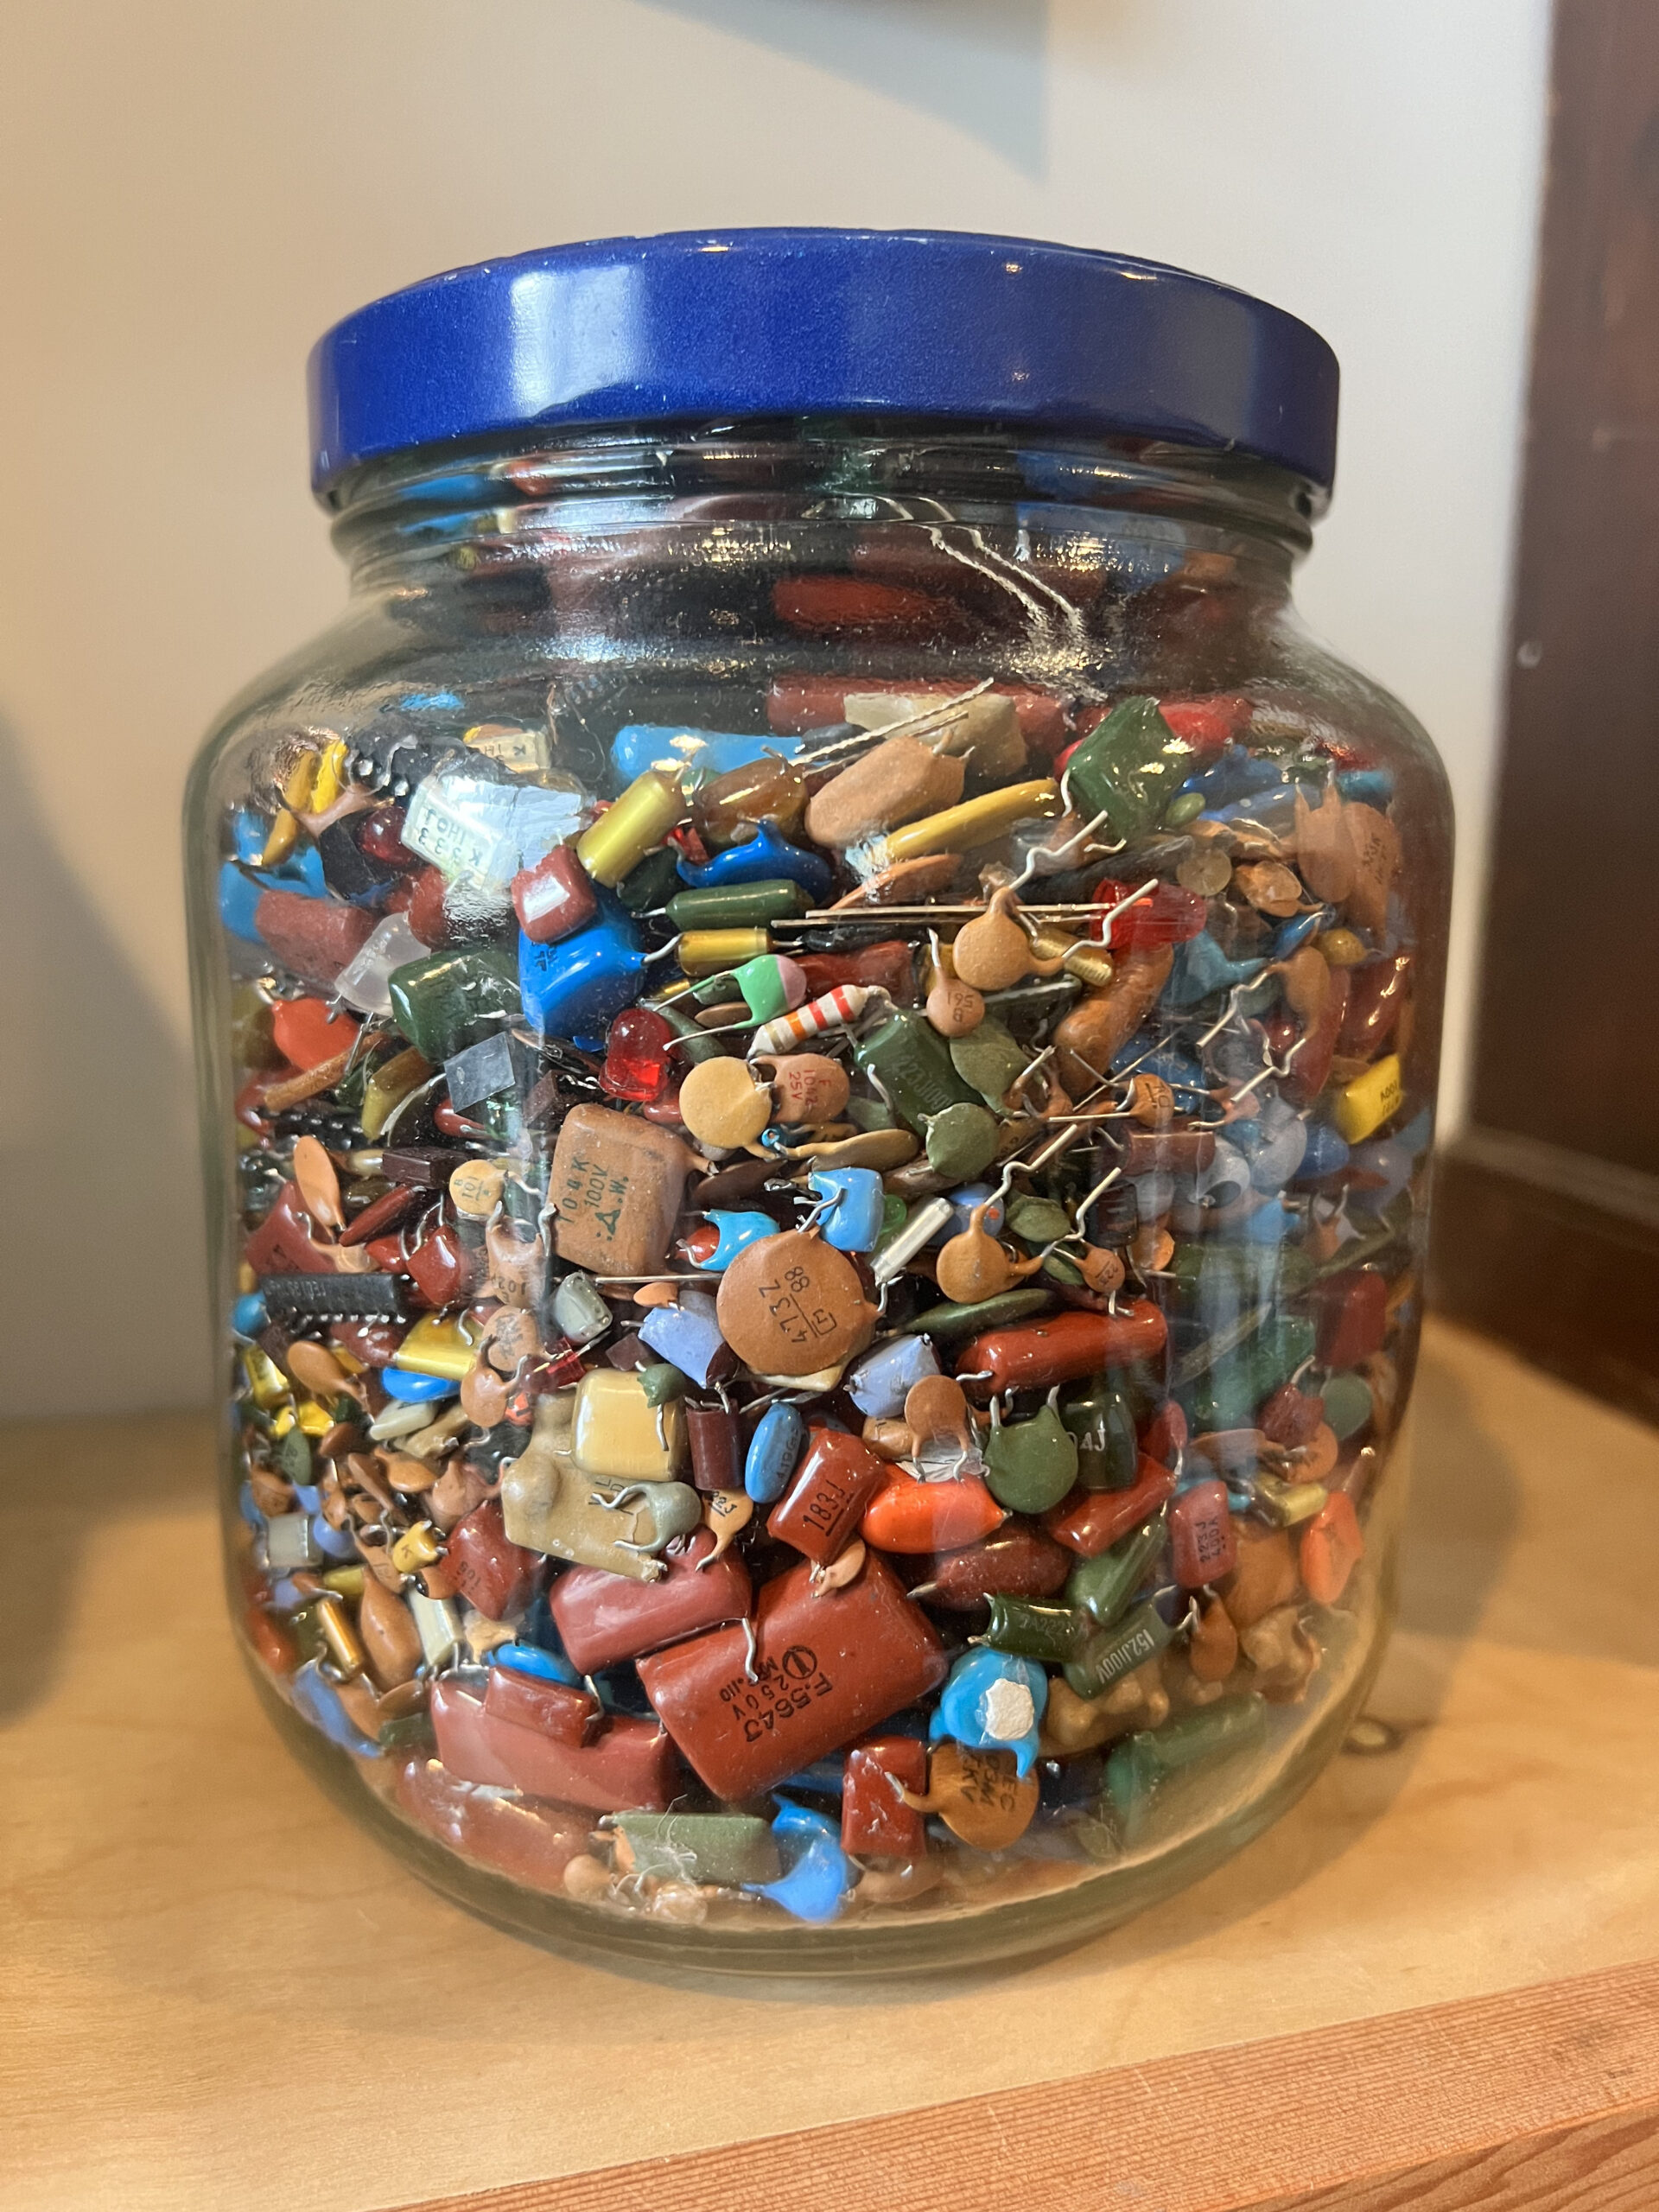 Vintage gallon glass peanut butter jar filled with multicoloured capacitors.